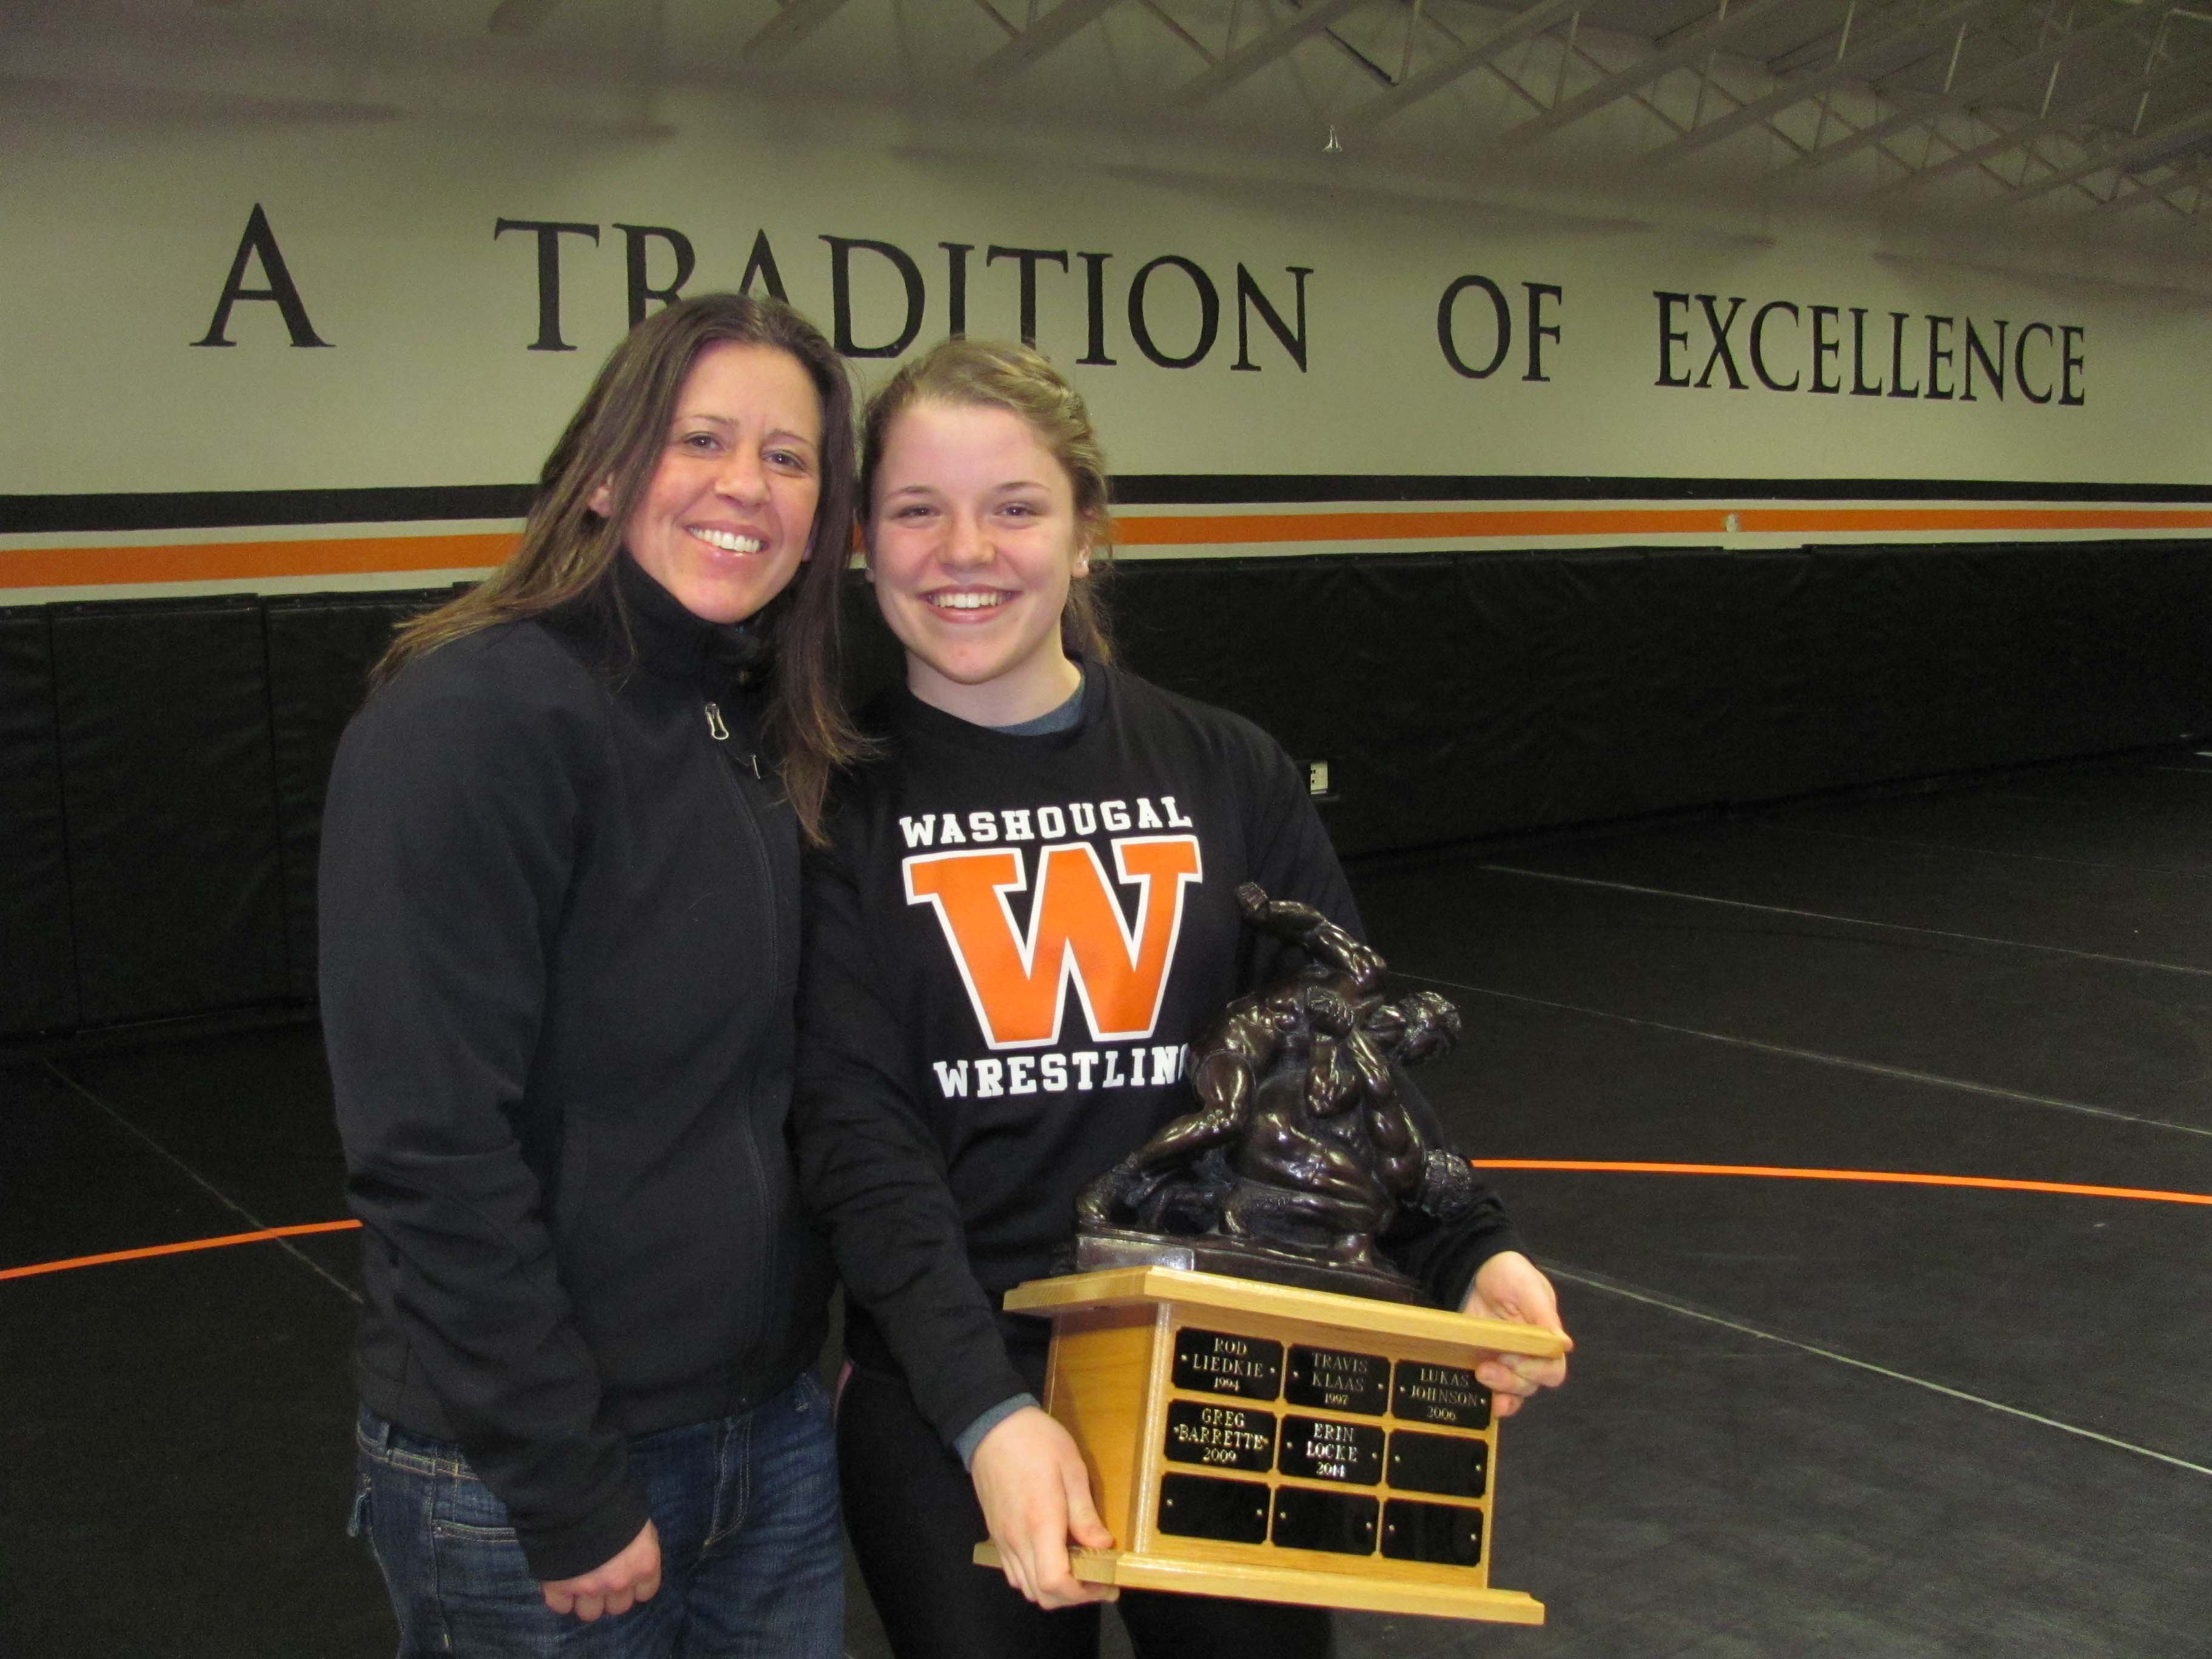 Erin Locke (right) shares a proud moment with coach Heather Carver (left).